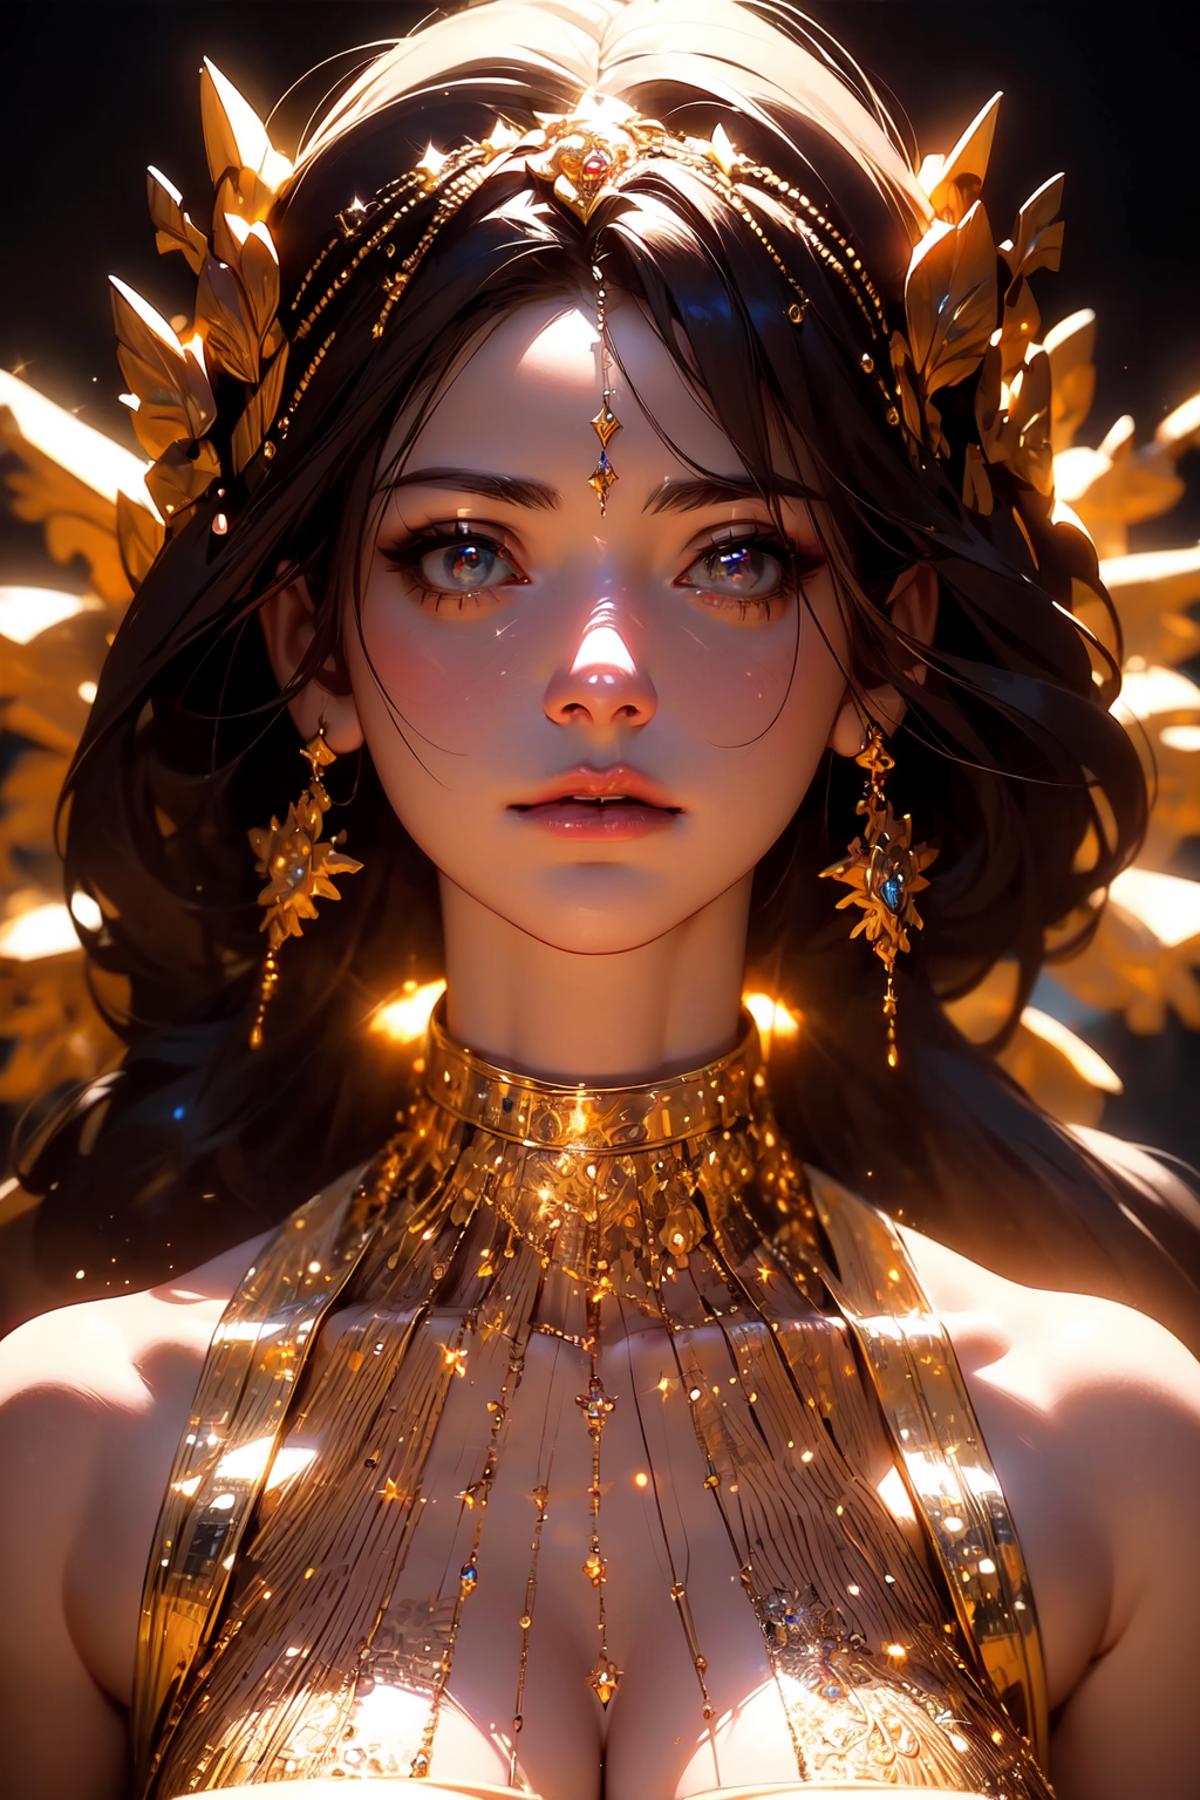 "An Artistic Portrait of a Woman with Blue Eyes and Golden Accessories"